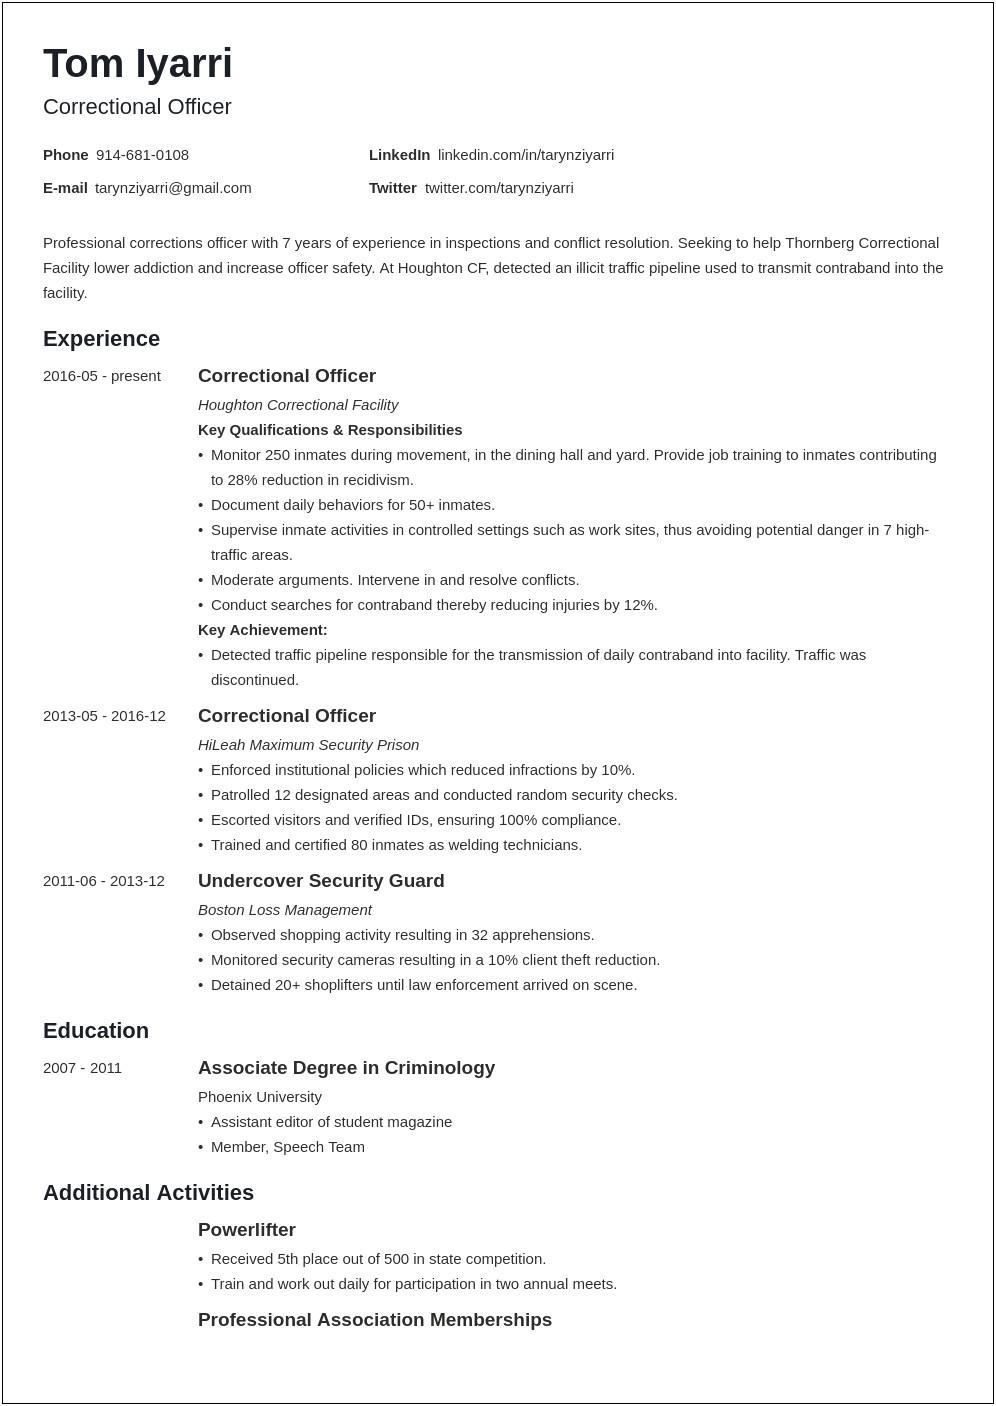 Resume For Correctional Officer With No Experience